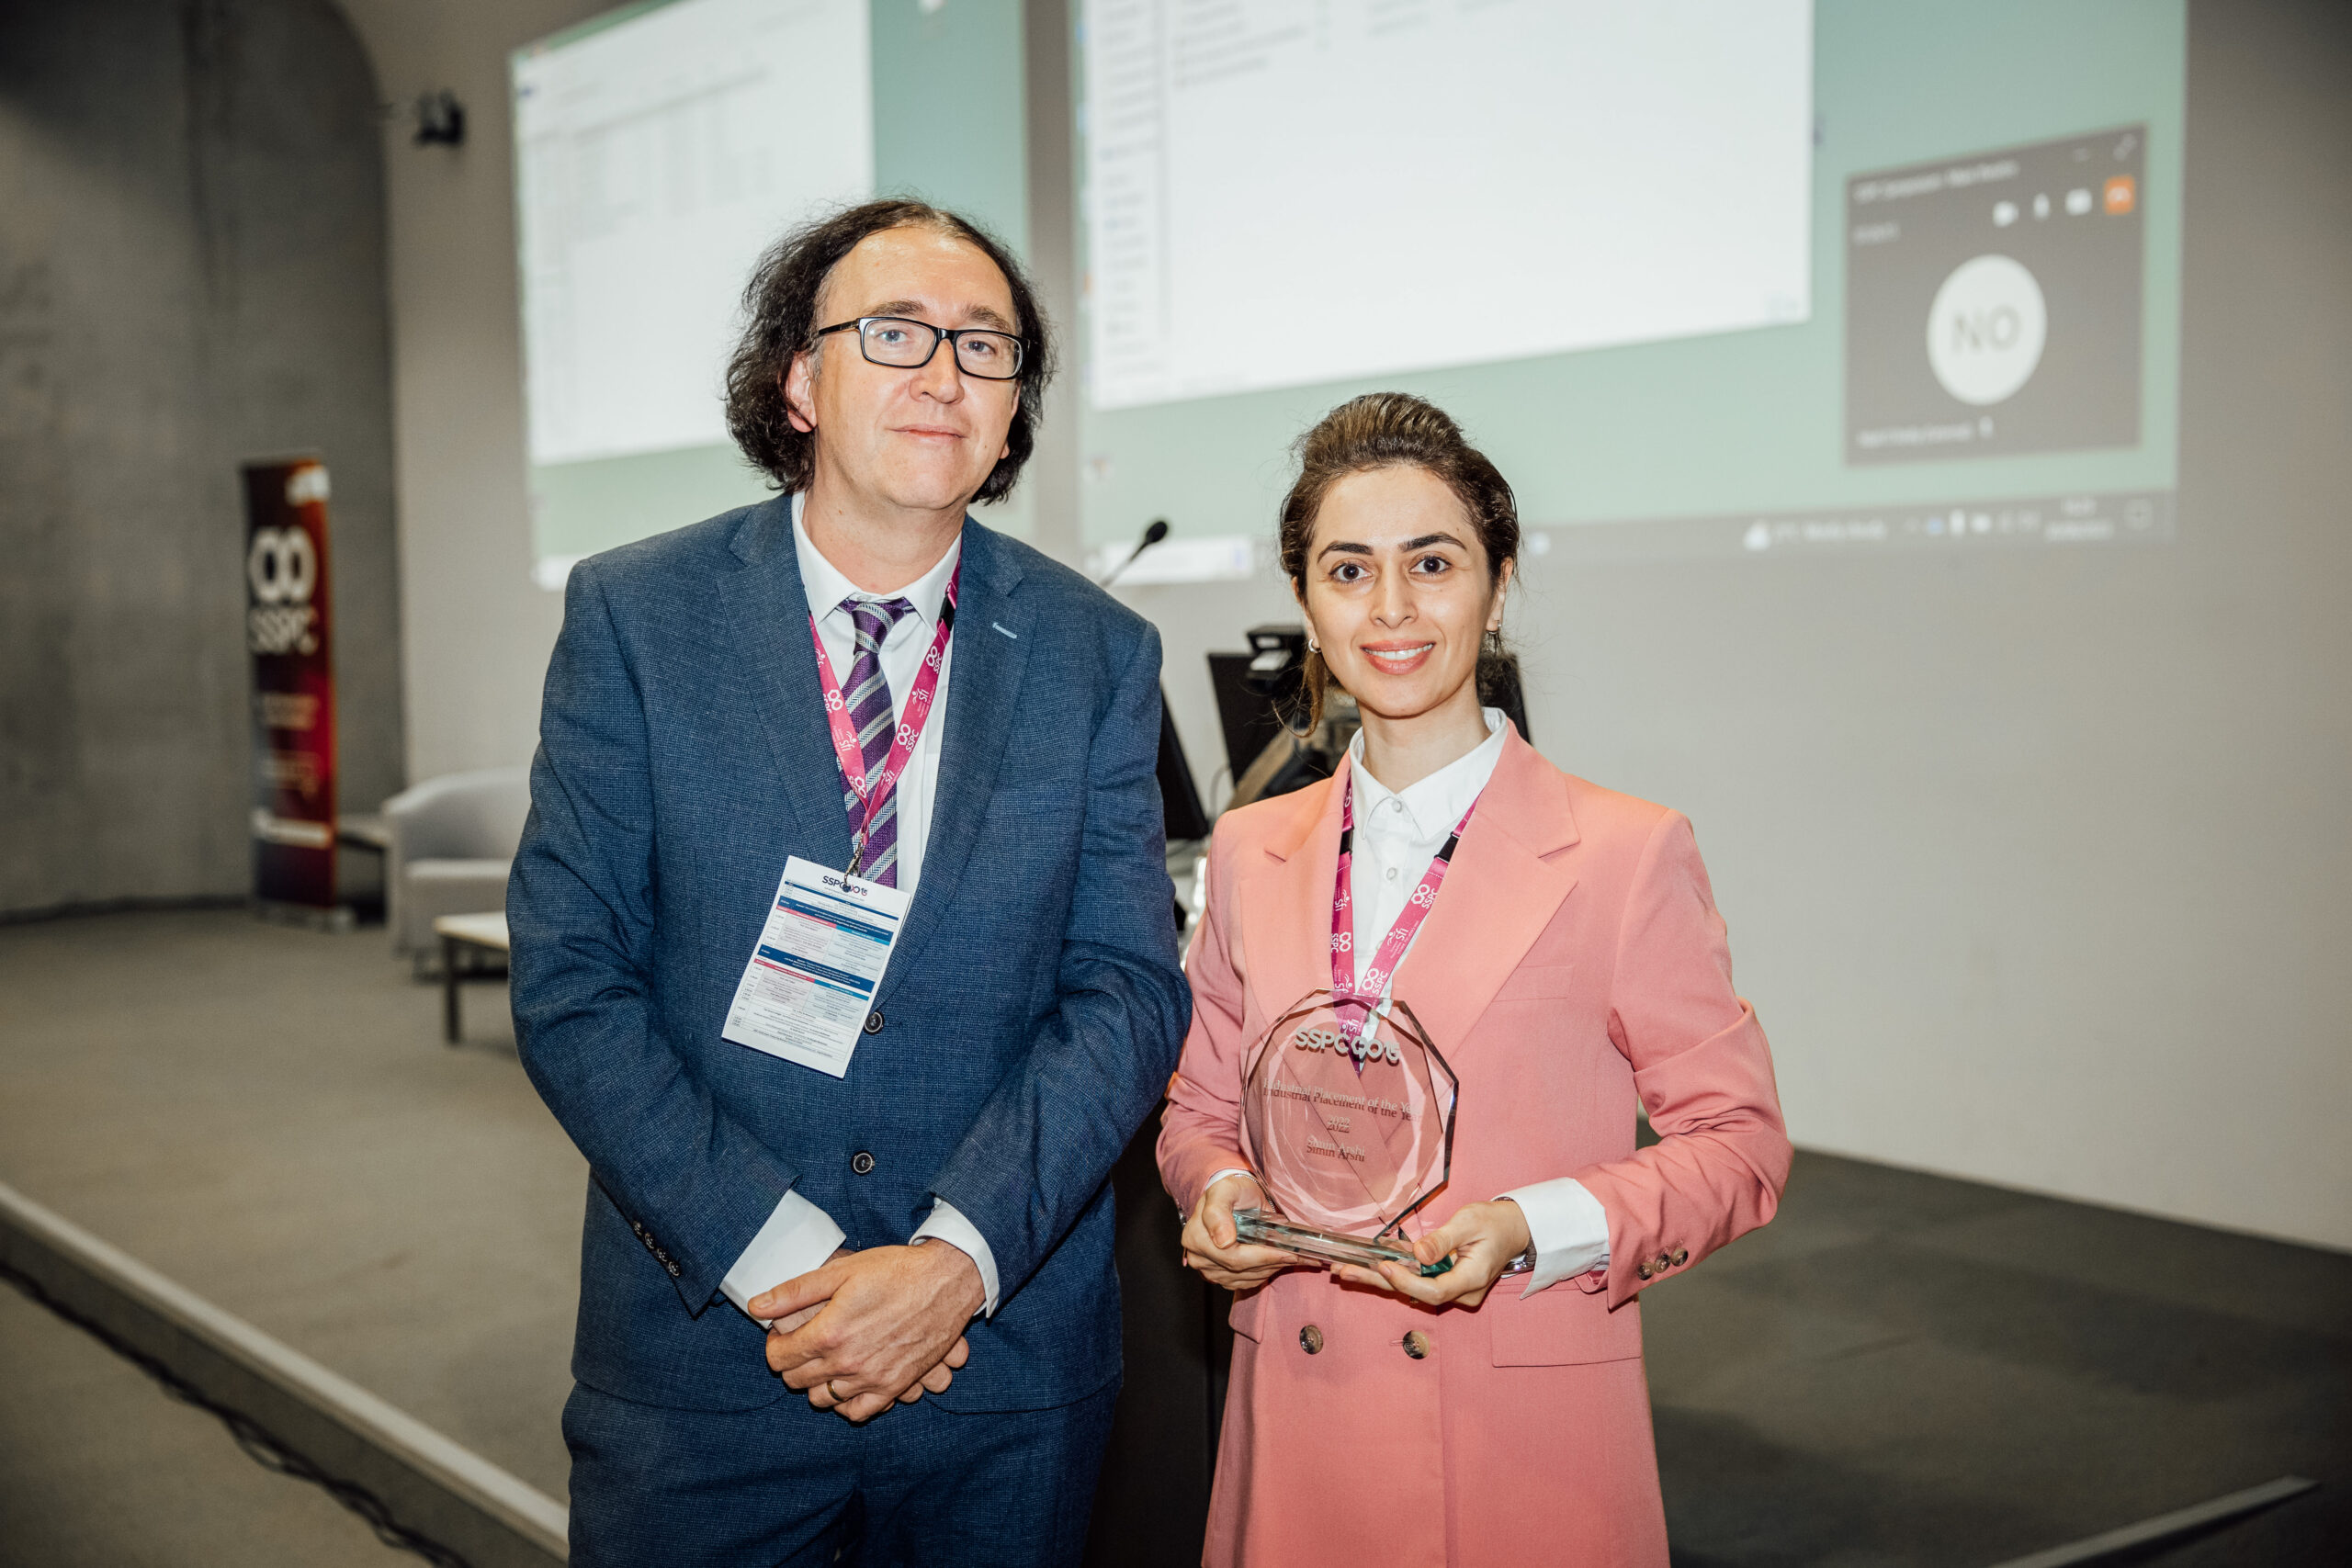 Simin Arshi wins SSPC Industry PhD placement award